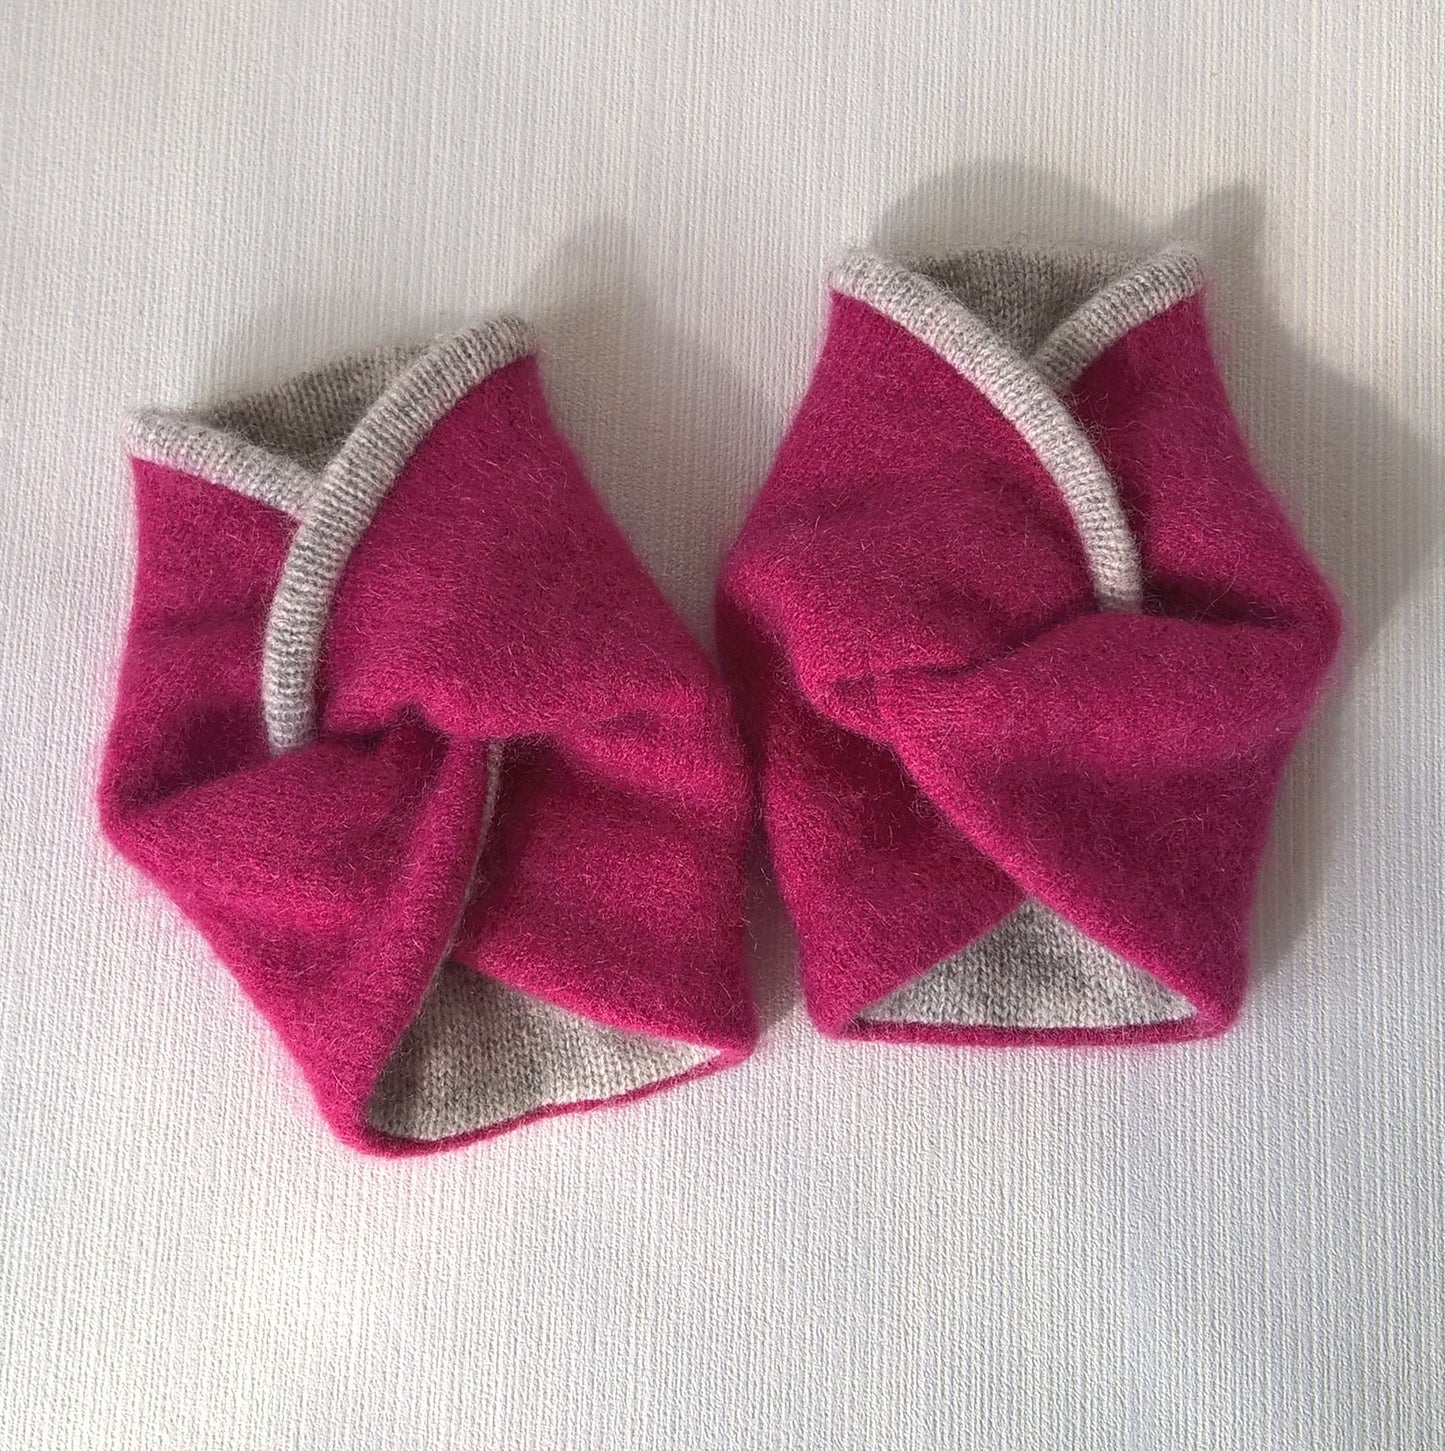 Felted raspberry pink cashmere edged and lined with grey cashmere